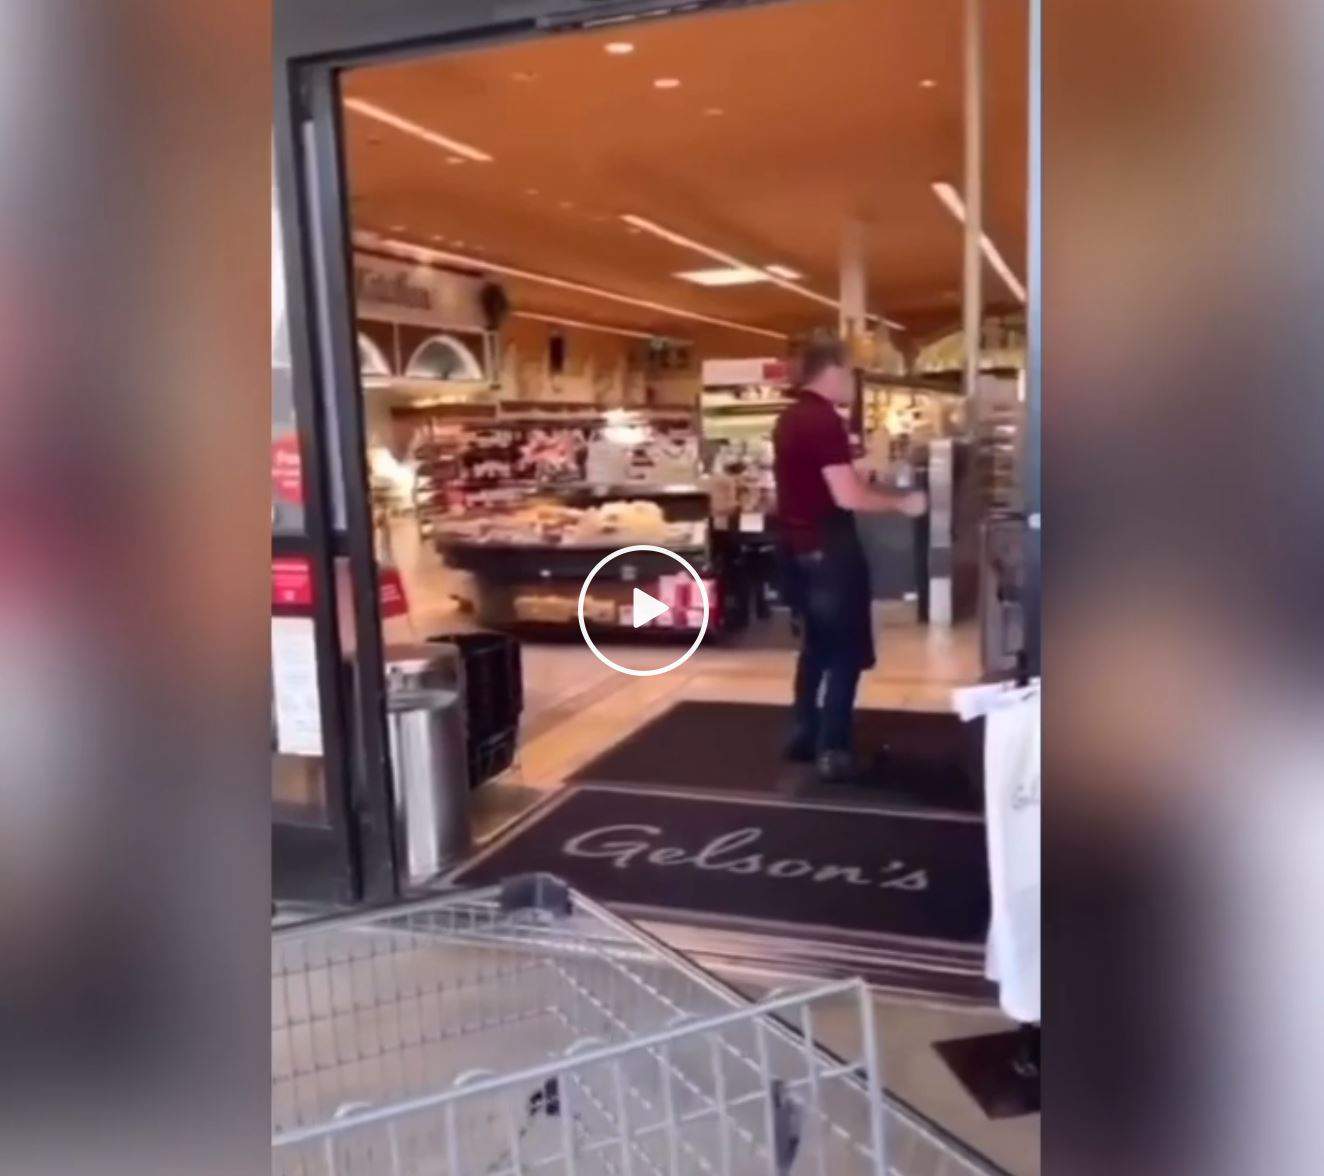 Viral video shows woman trying to enter grocery store without a mask